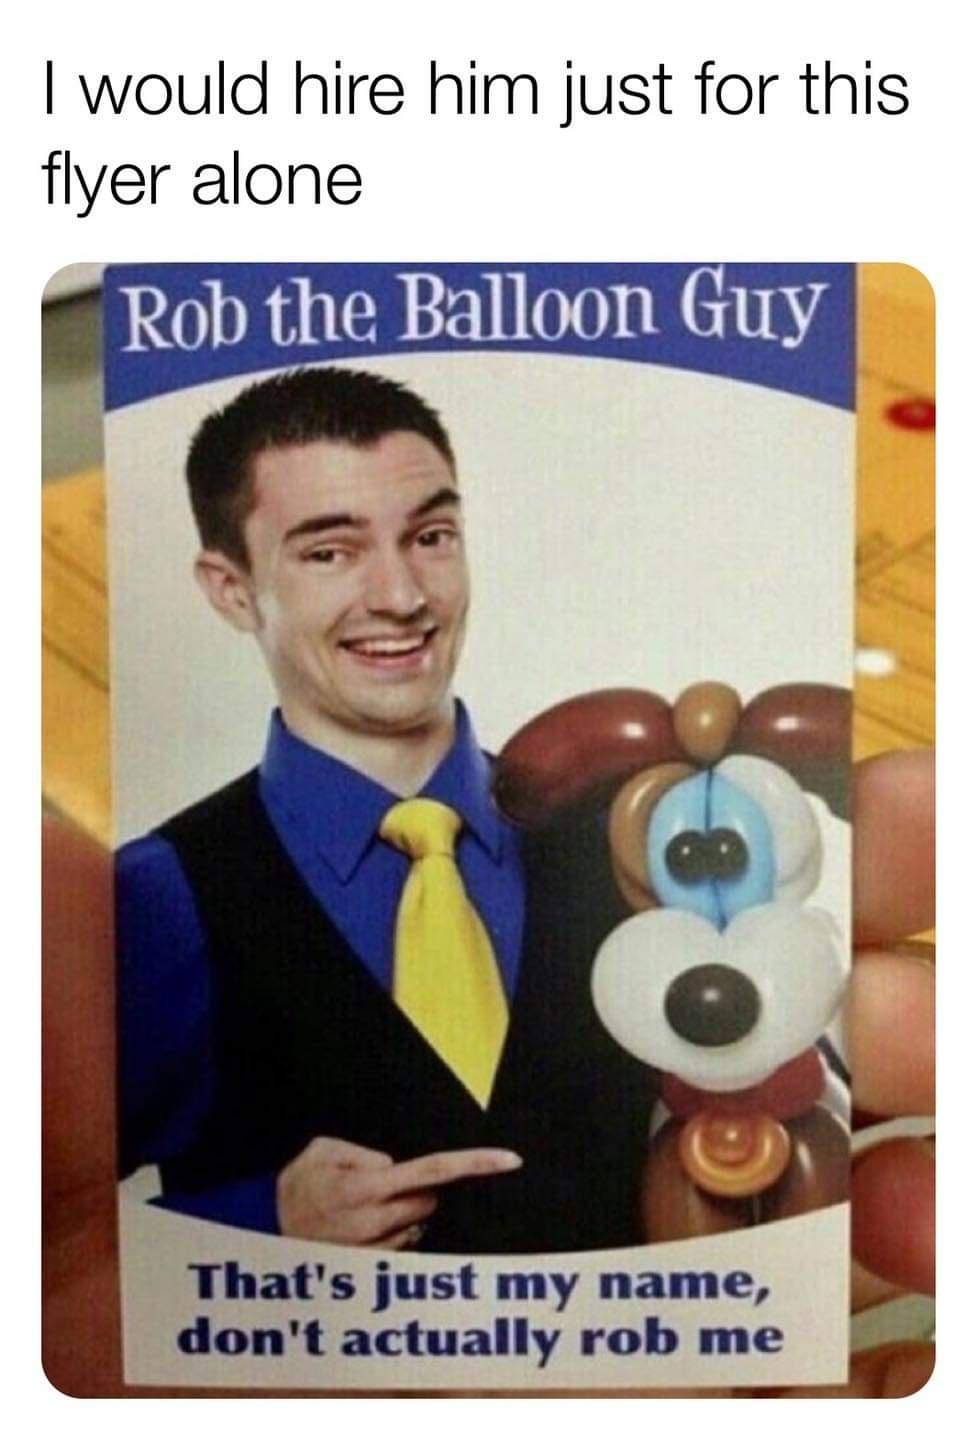 funny memes - rob the balloon guy - I would hire him just for this flyer alone Rob the Balloon Guy That's just my name, don't actually rob me